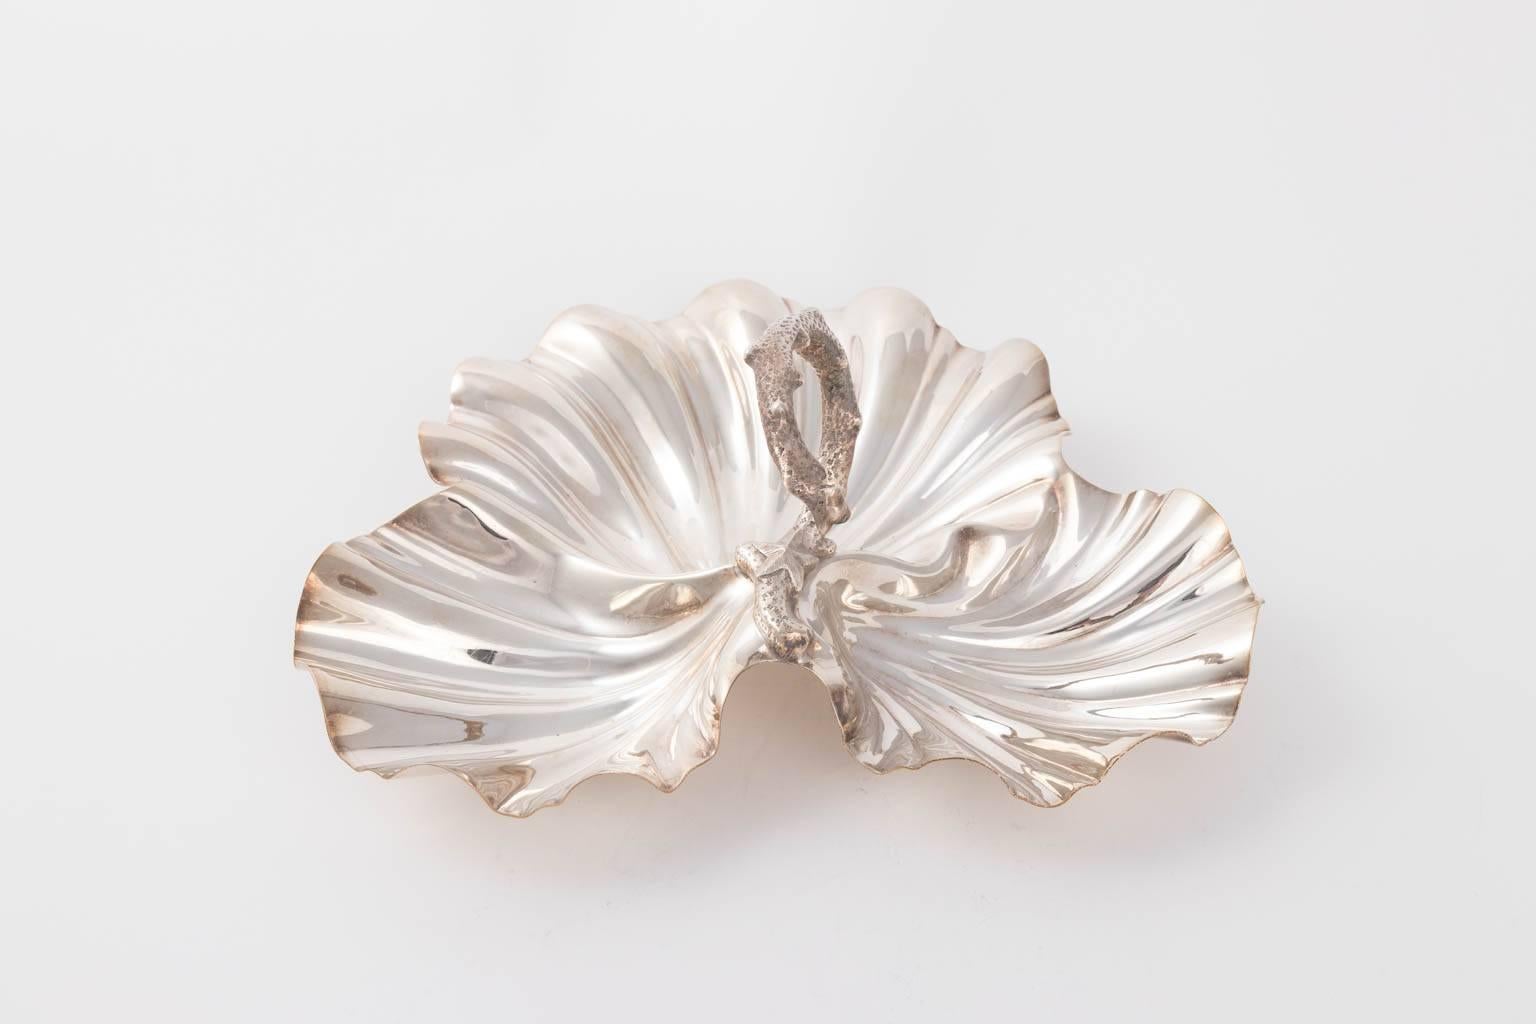 Scallop Shell Silver Plated Serving Dish 6